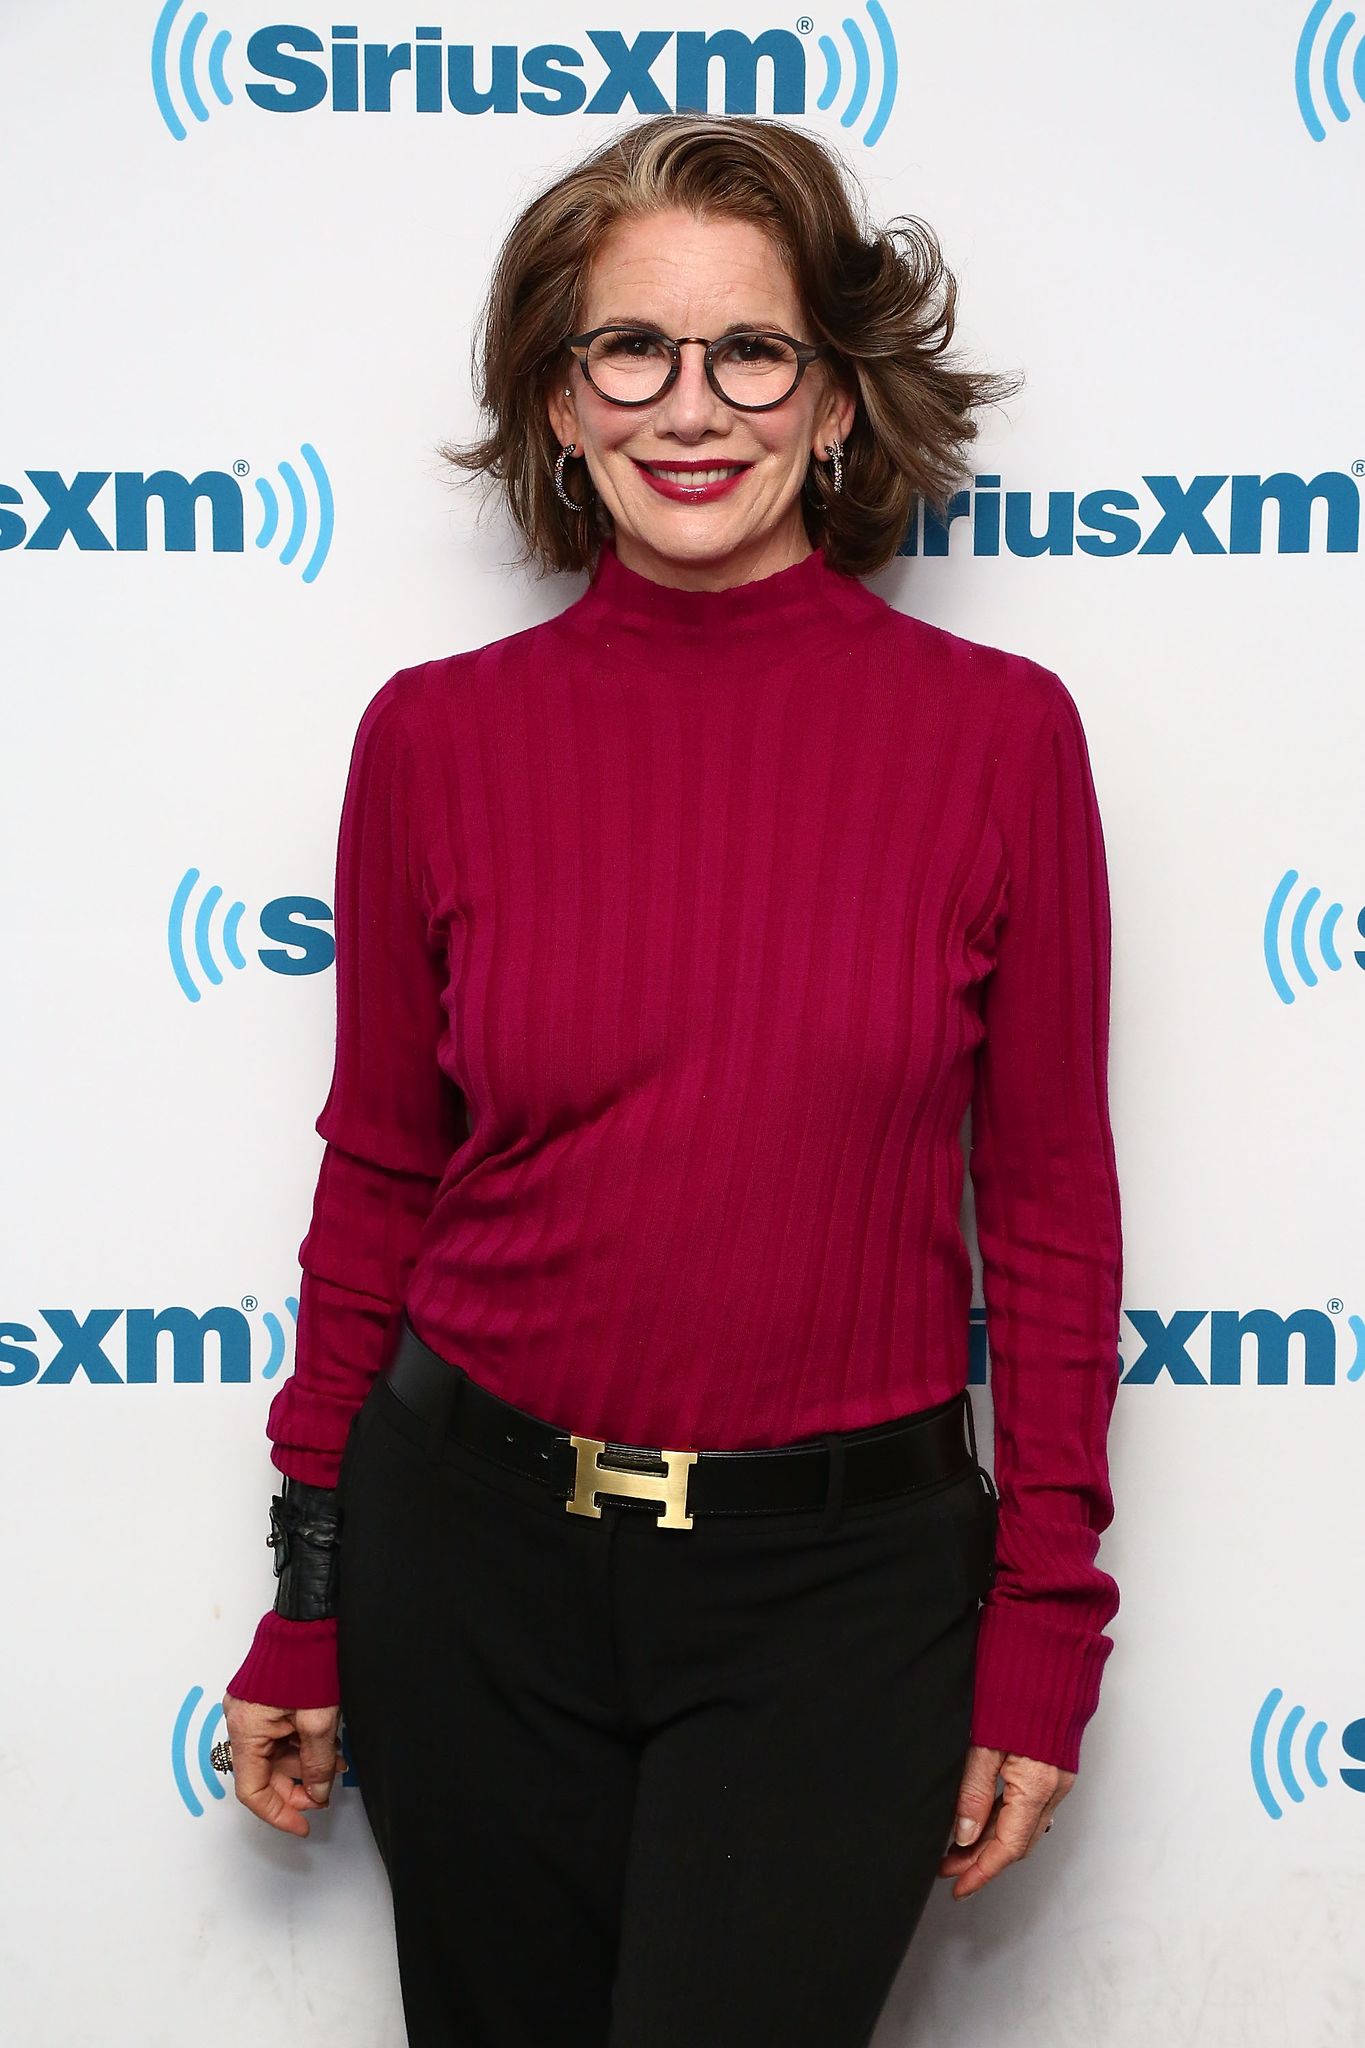 Actress Melissa Gilbert at the SiriusXM Studios on November 17, 2017 in New York City | Photo: Getty Images